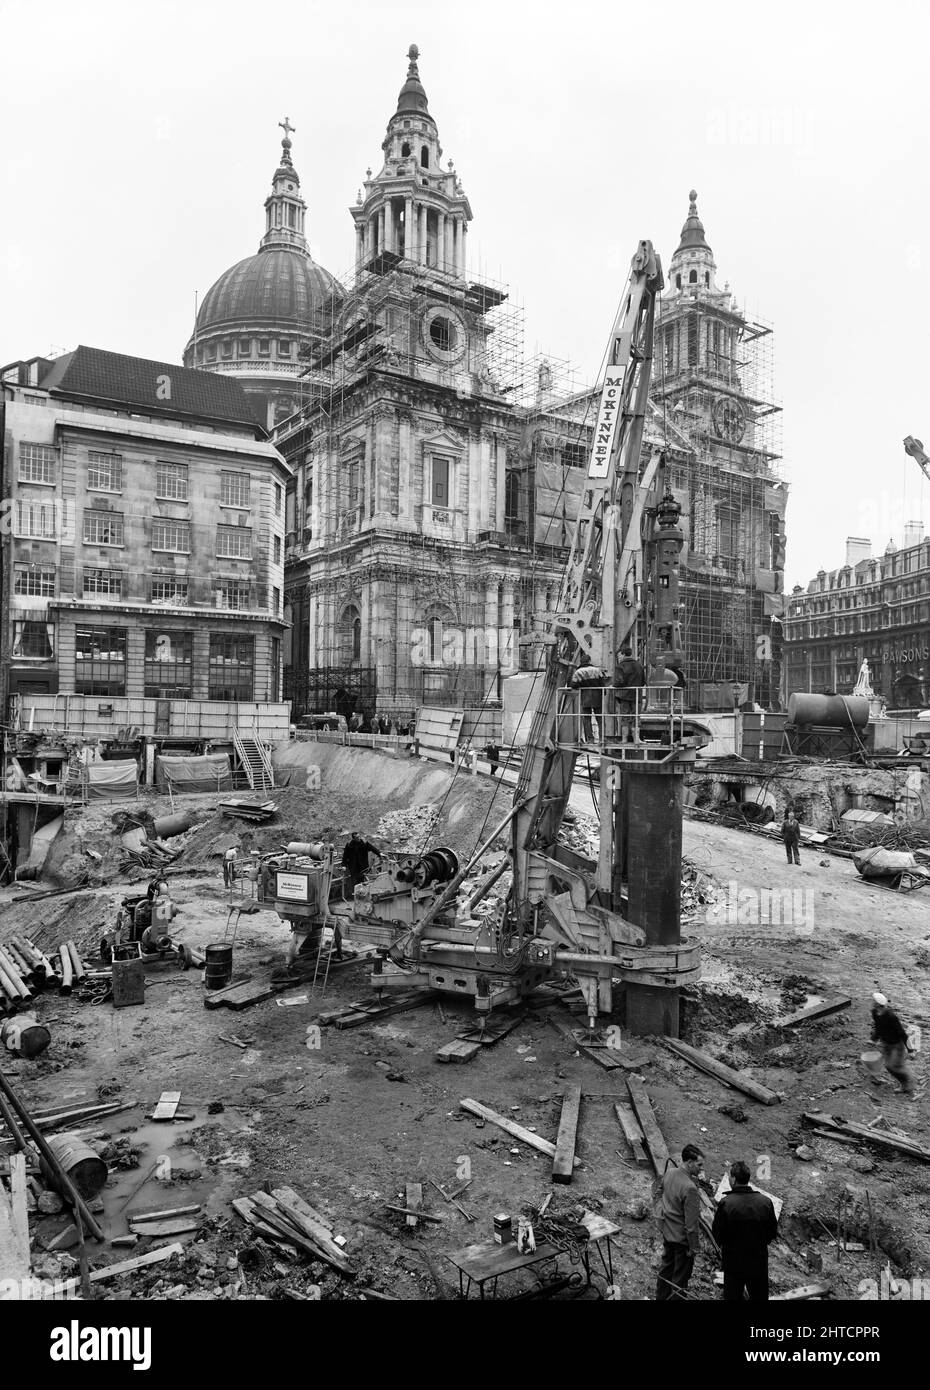 St Paul's Cathedral, St Paul's Churchyard, City of London, 01/10/1963. A McKinney DAG 60 drilling rig in operation during the construction of the Paternoster development, with the west end of St Paul's Cathedral in the background. Work on the Paternoster development was carried out in a joint venture by John Laing Construction Limited, Trollope and Colls Limited, and George Wimpey and Company Limited. The scheme involved the redevelopment of a seven acre site on the north side of St Paul&#x2019;s Cathedral. The site had been almost entirely devastated during an incendiary raid in December 1940 Stock Photo